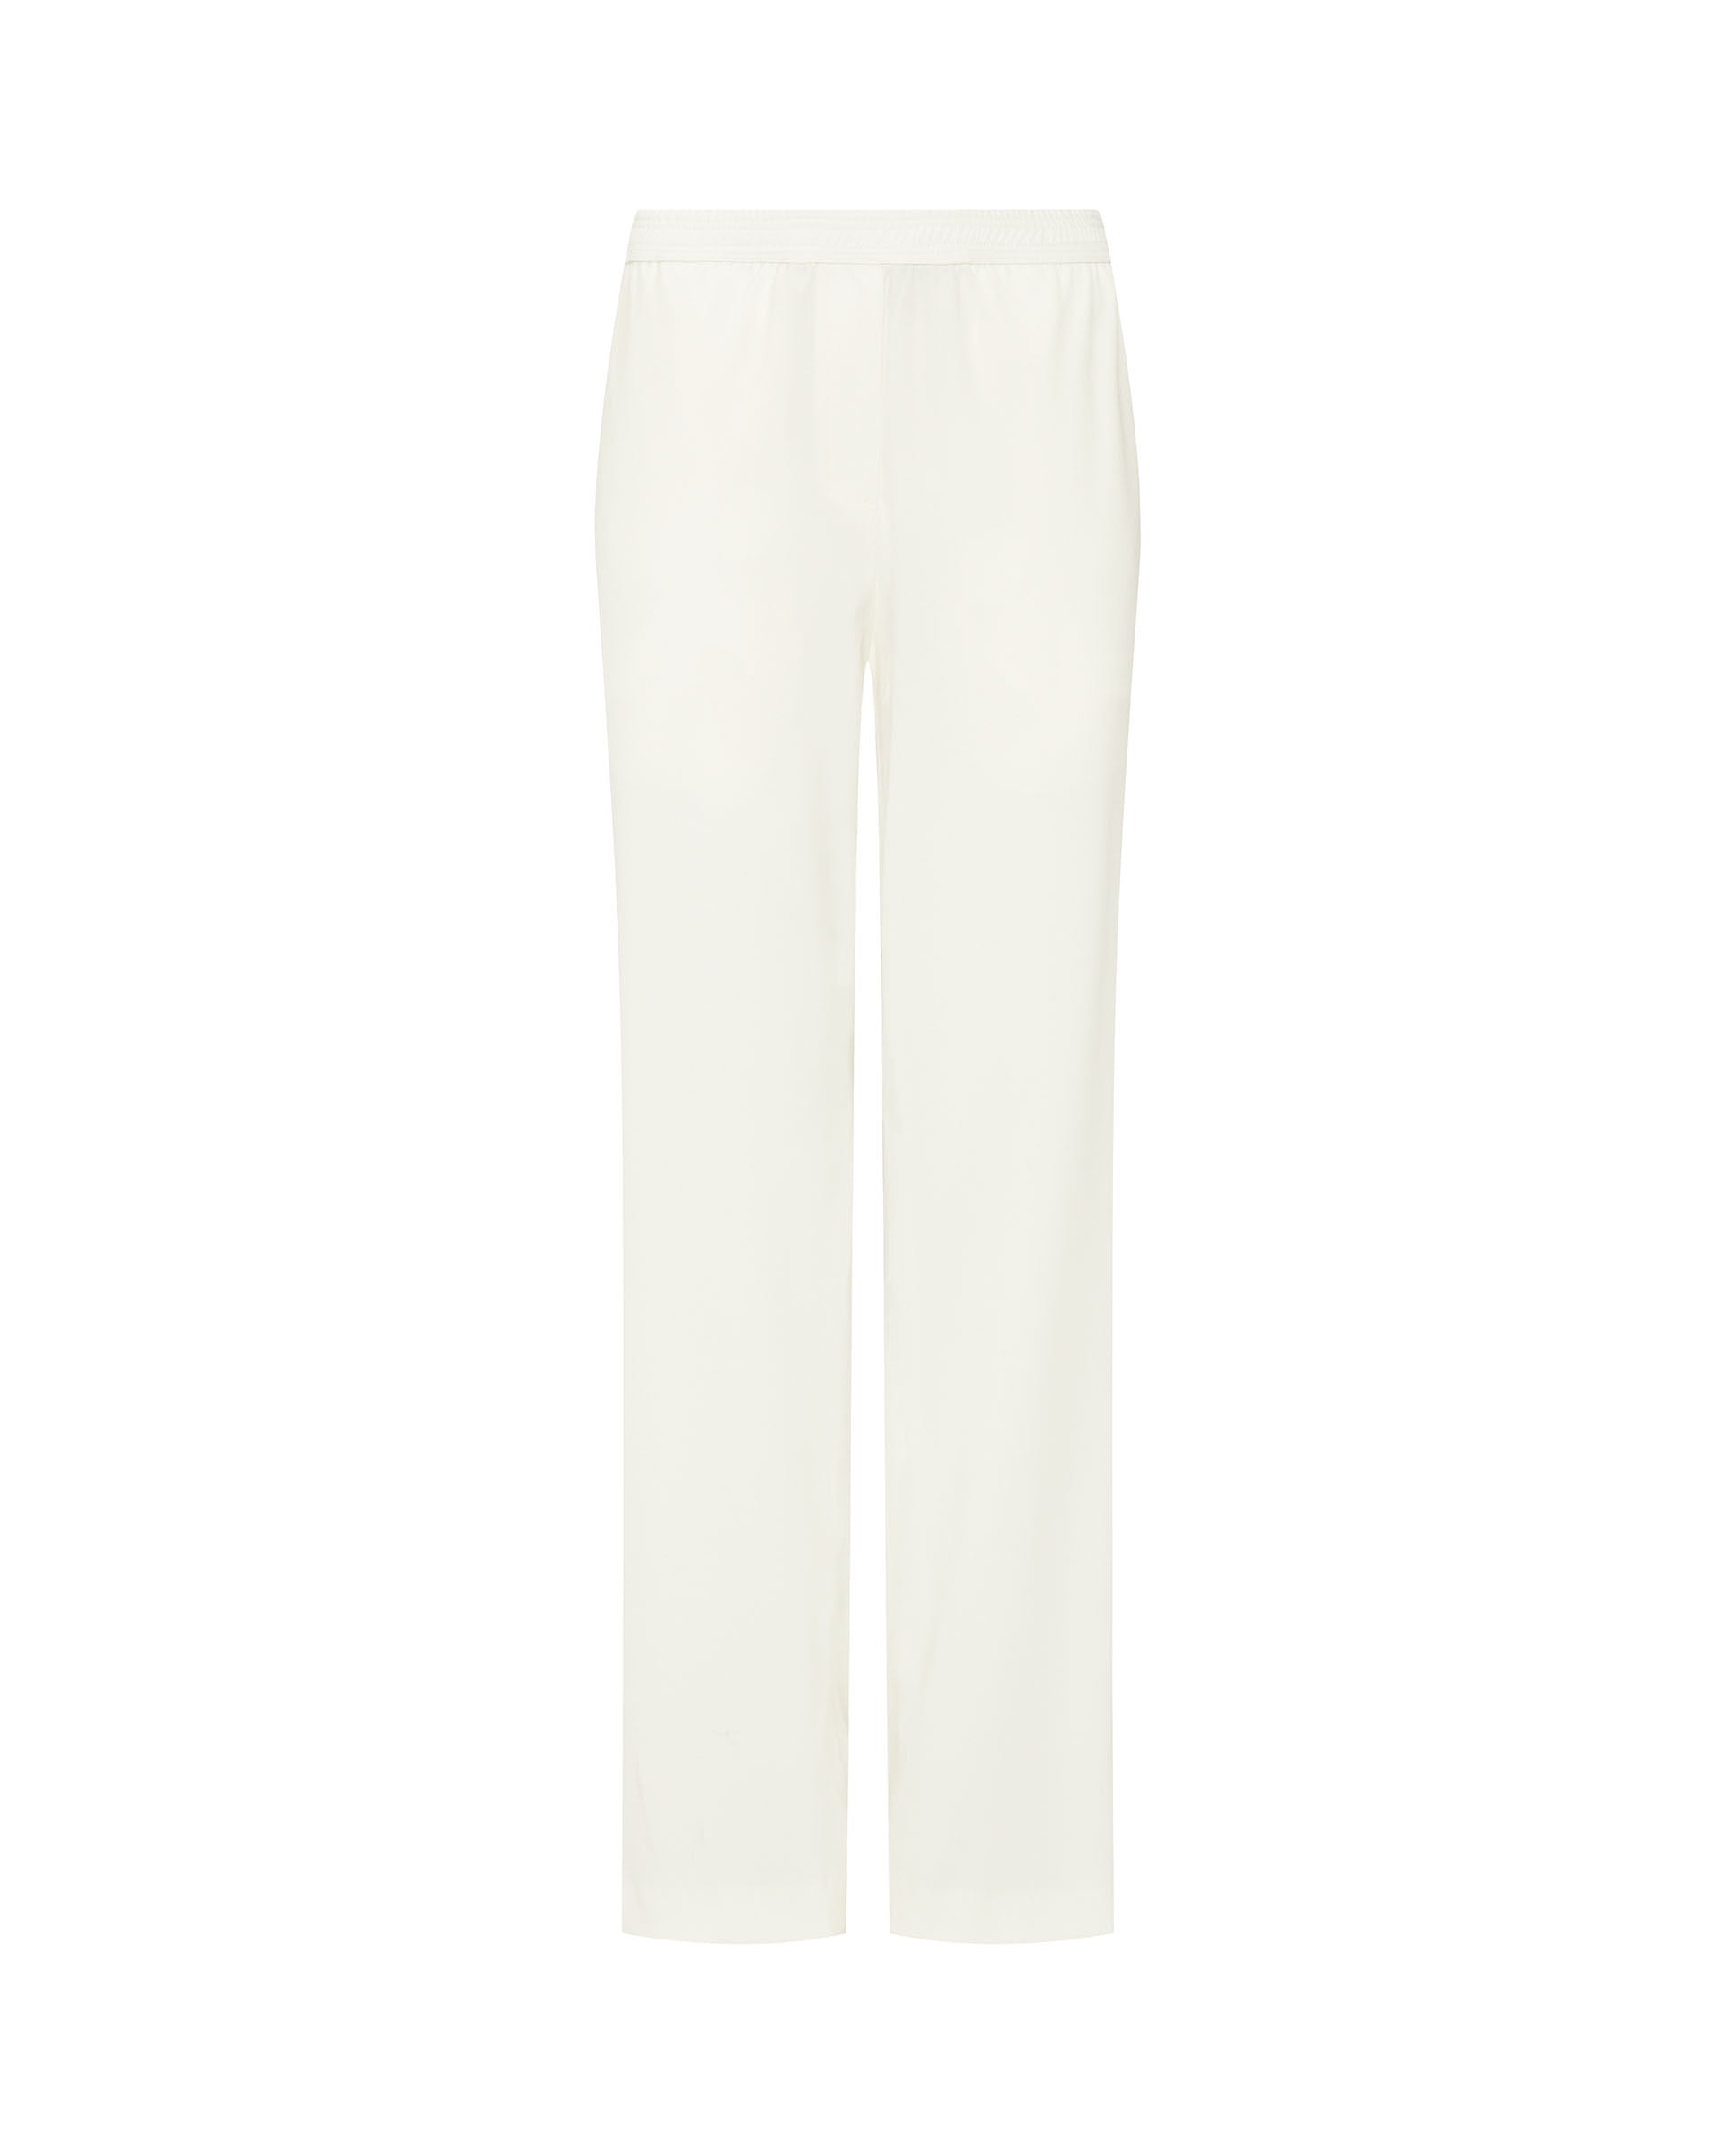 White fluid trousers by MIRTO